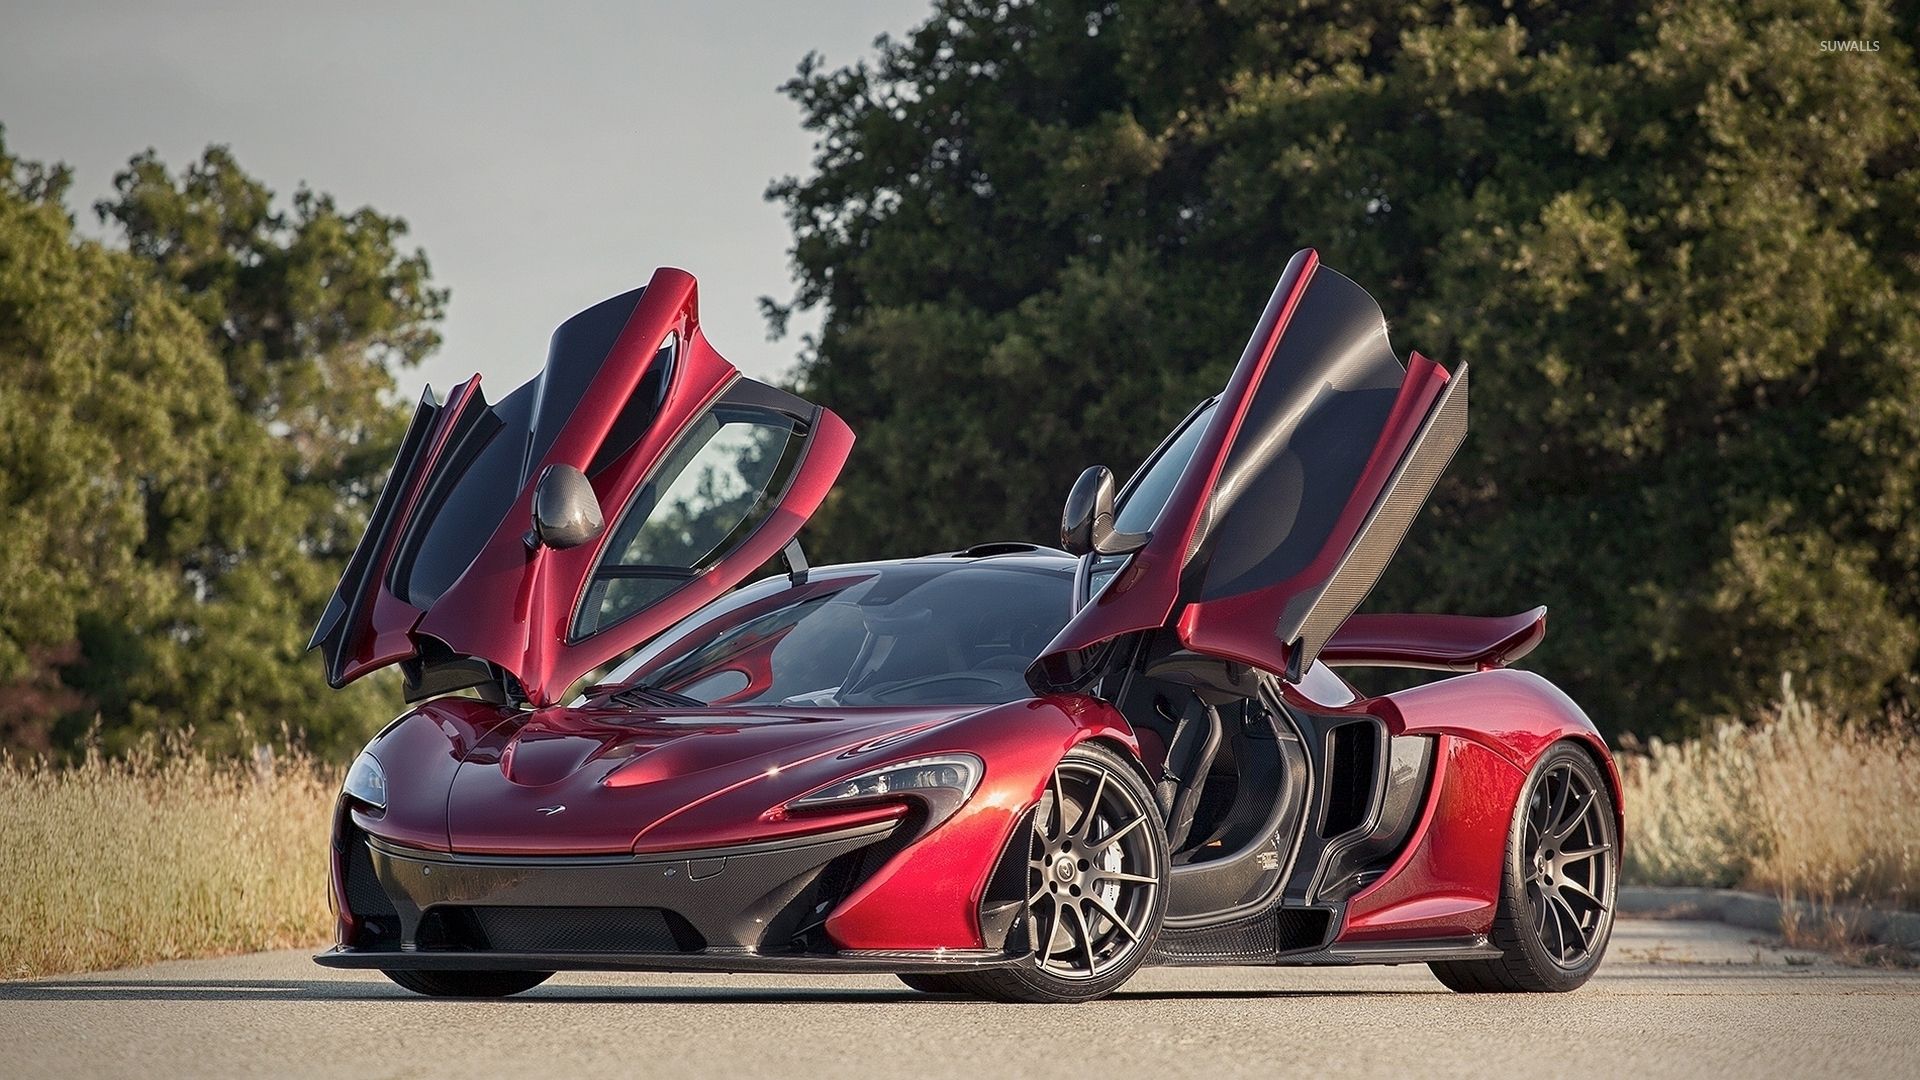 Front side view of a red McLaren P1 .suwalls.com